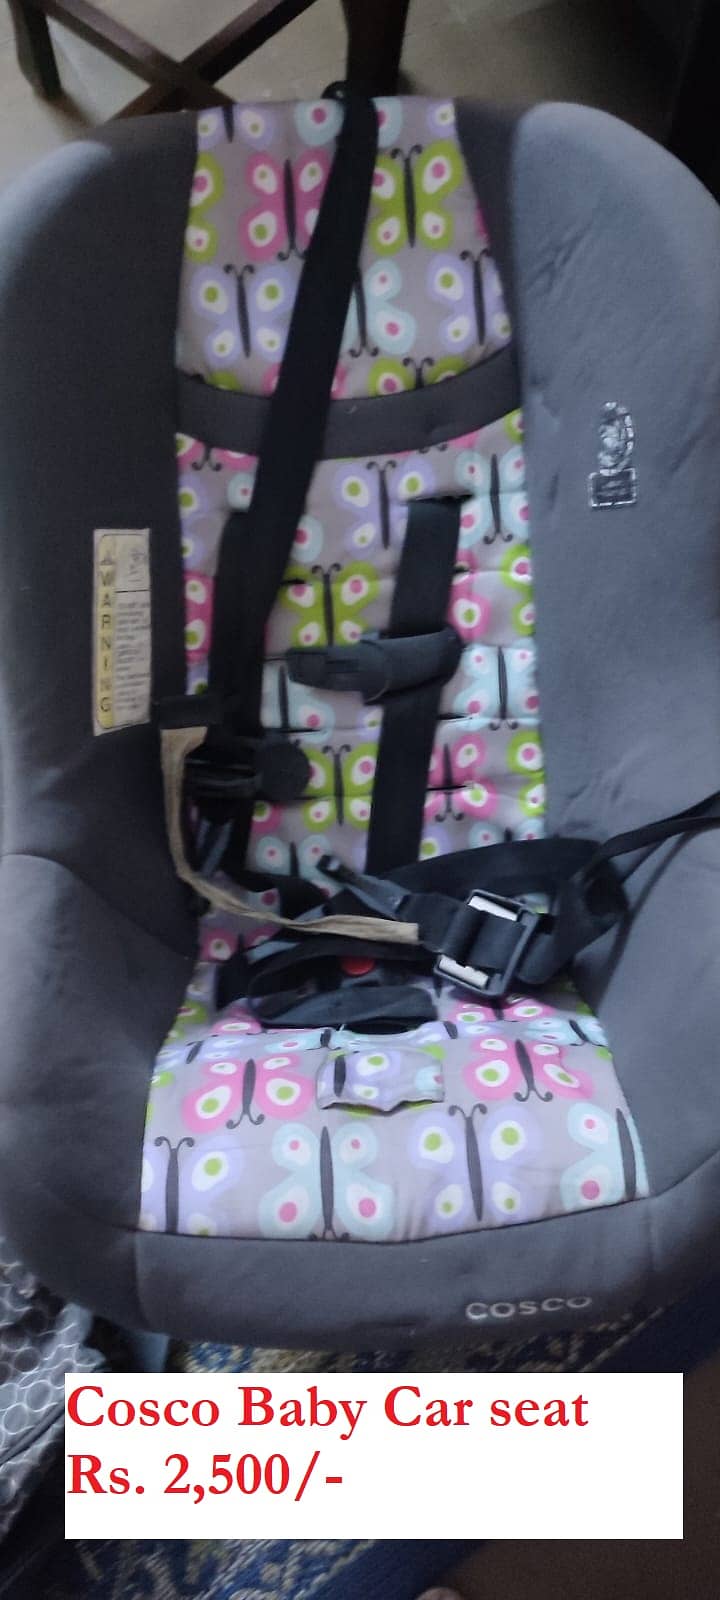 Baby Cot, Car Seats, Carry, Discovery Gym, Cot Mobile , B. pump 3